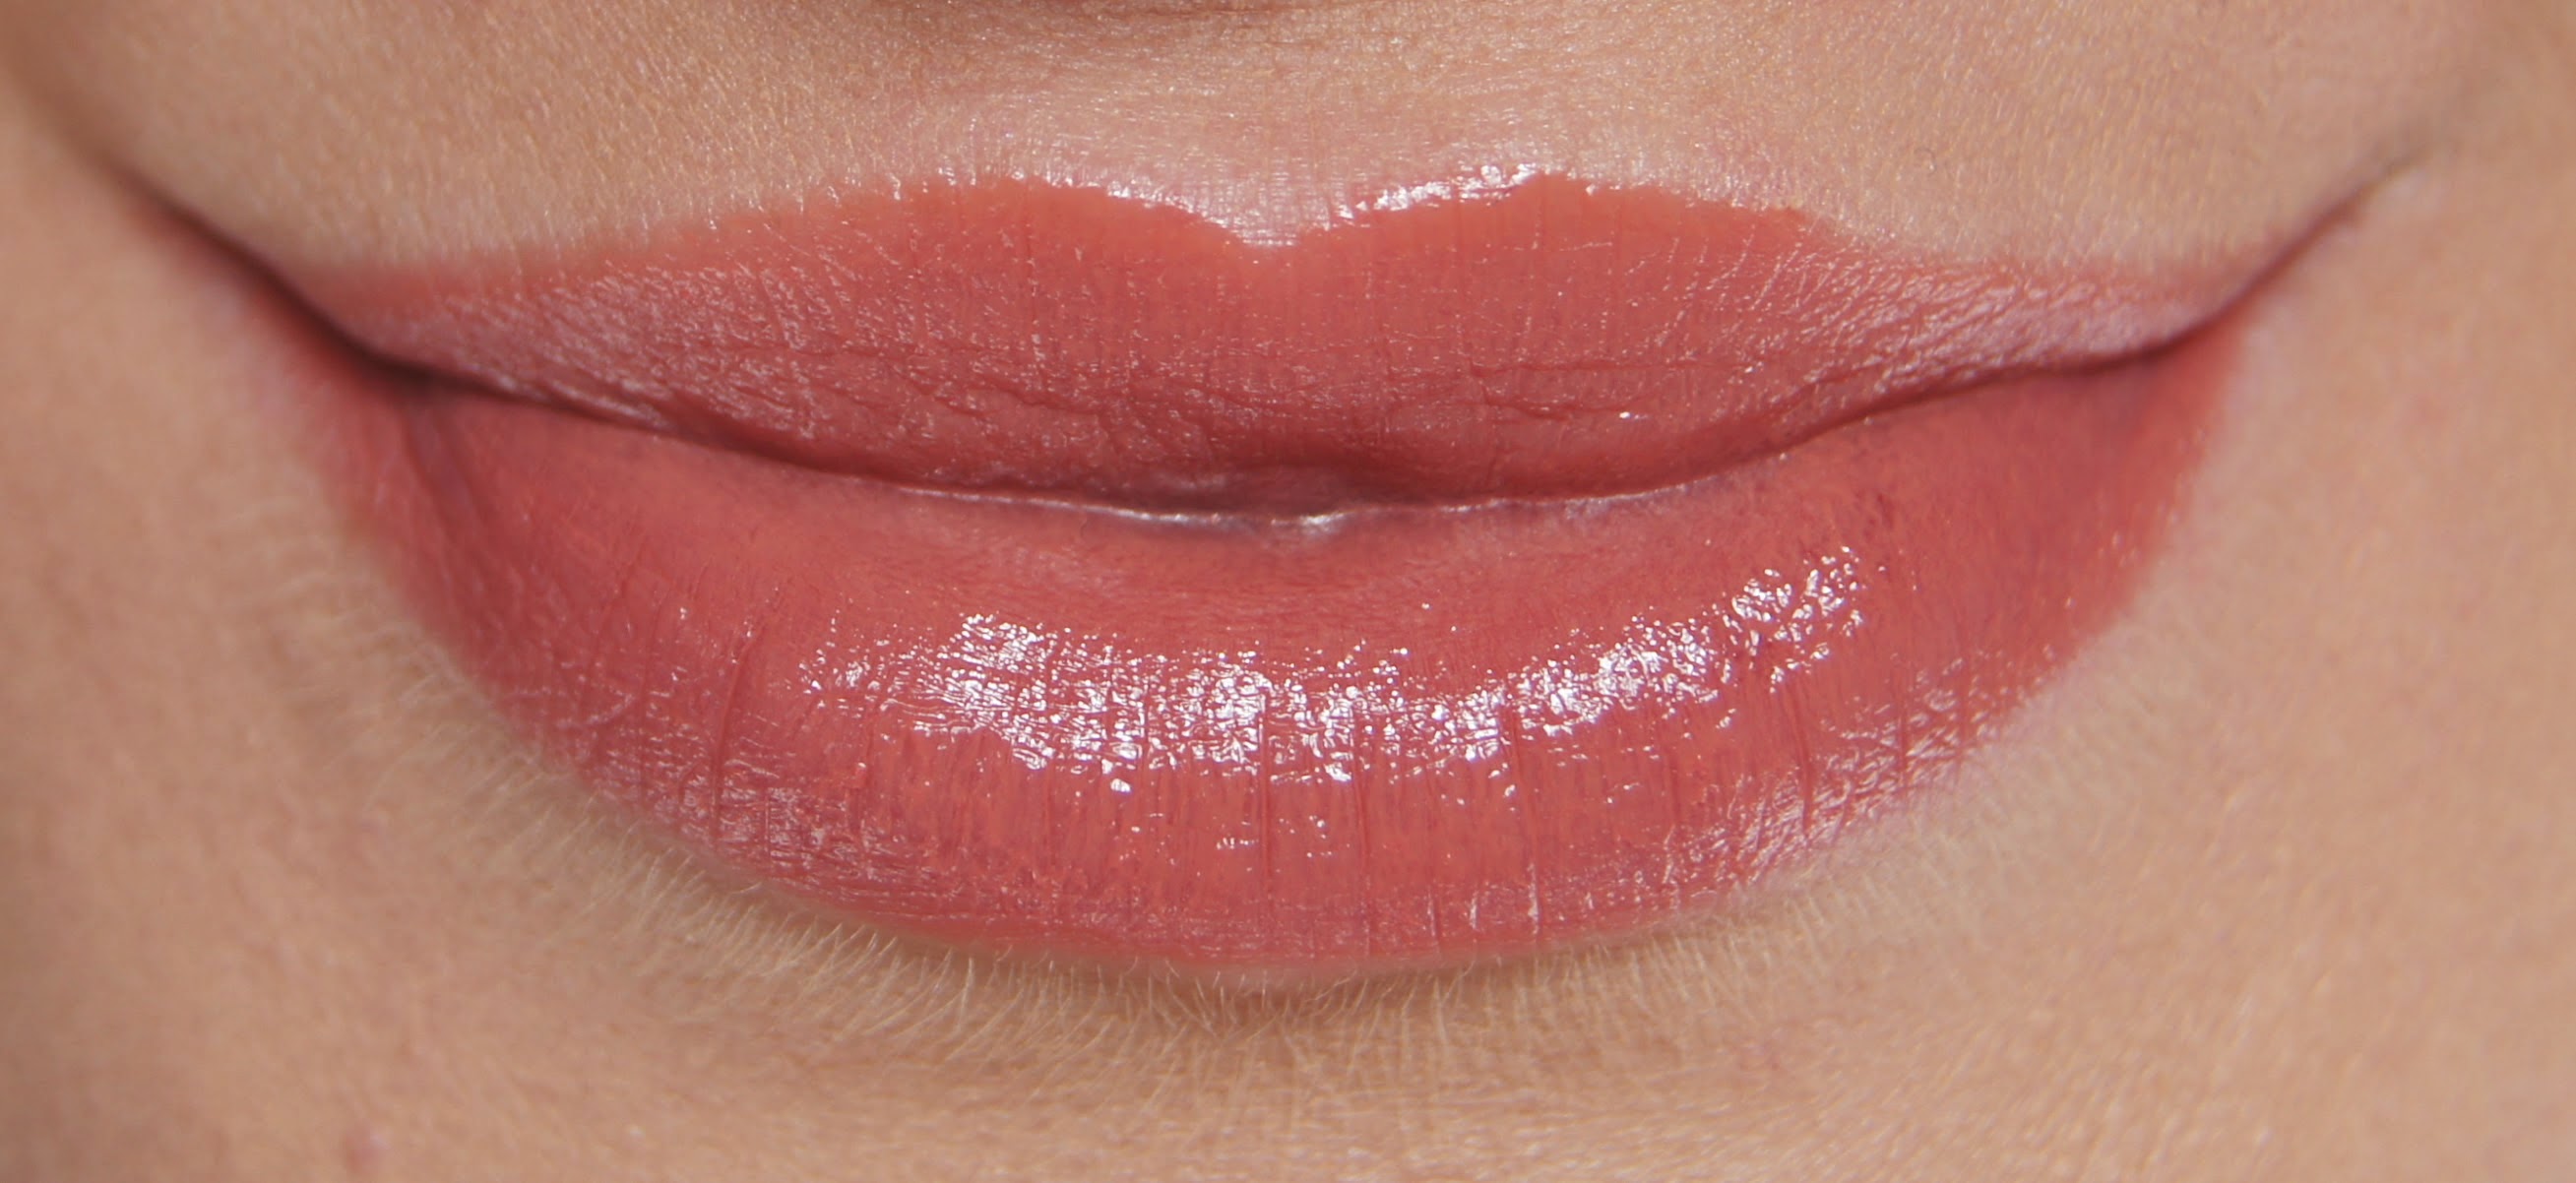 dior rouge dior nude lip blush lipstick grege swatch review